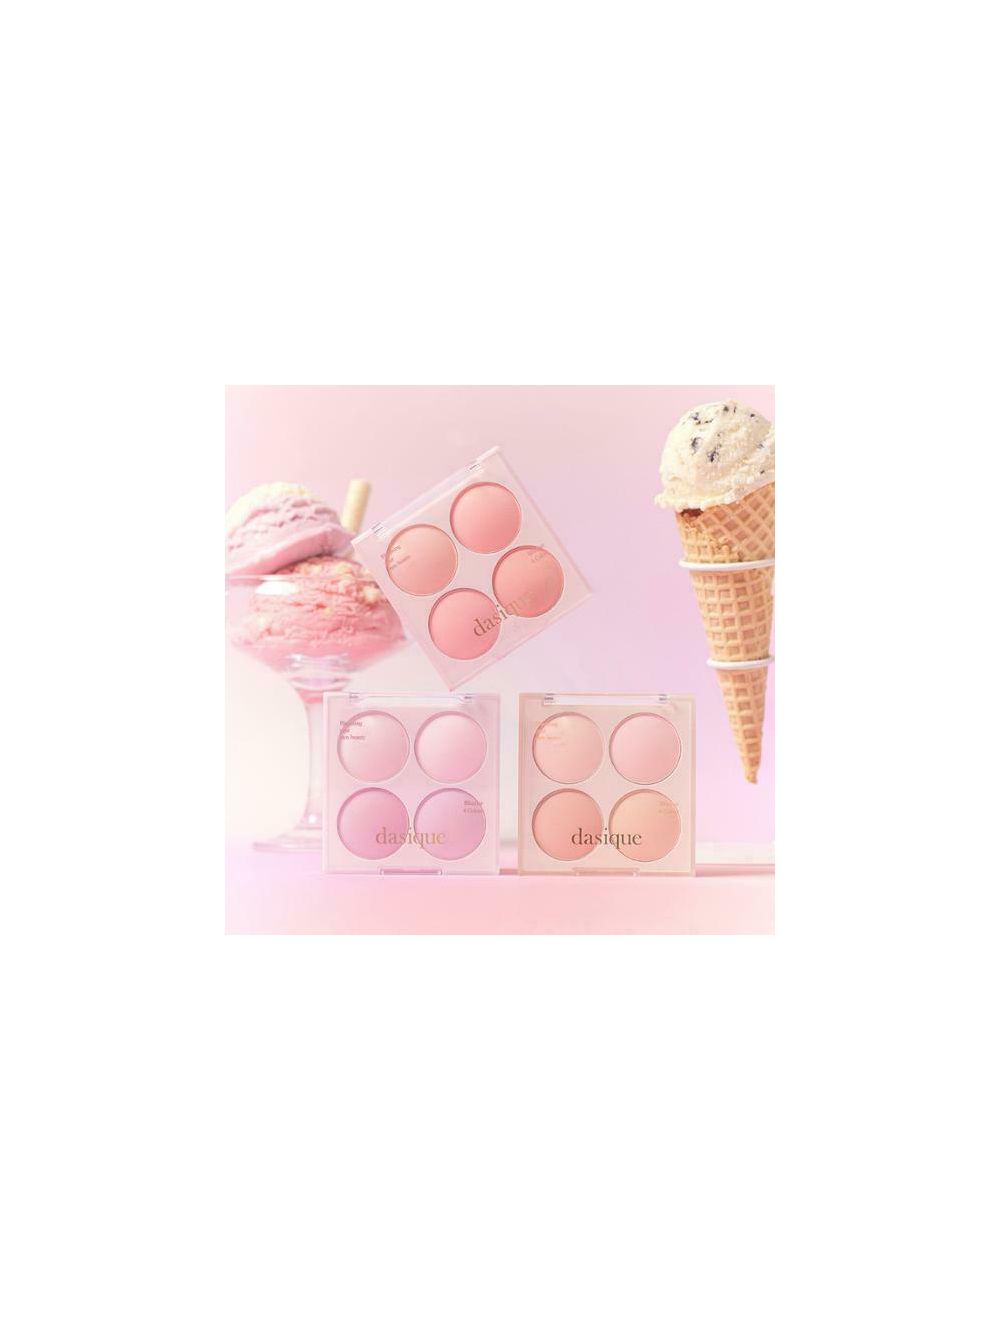 Shop Japanese and Korean Skincare and Makeup Online